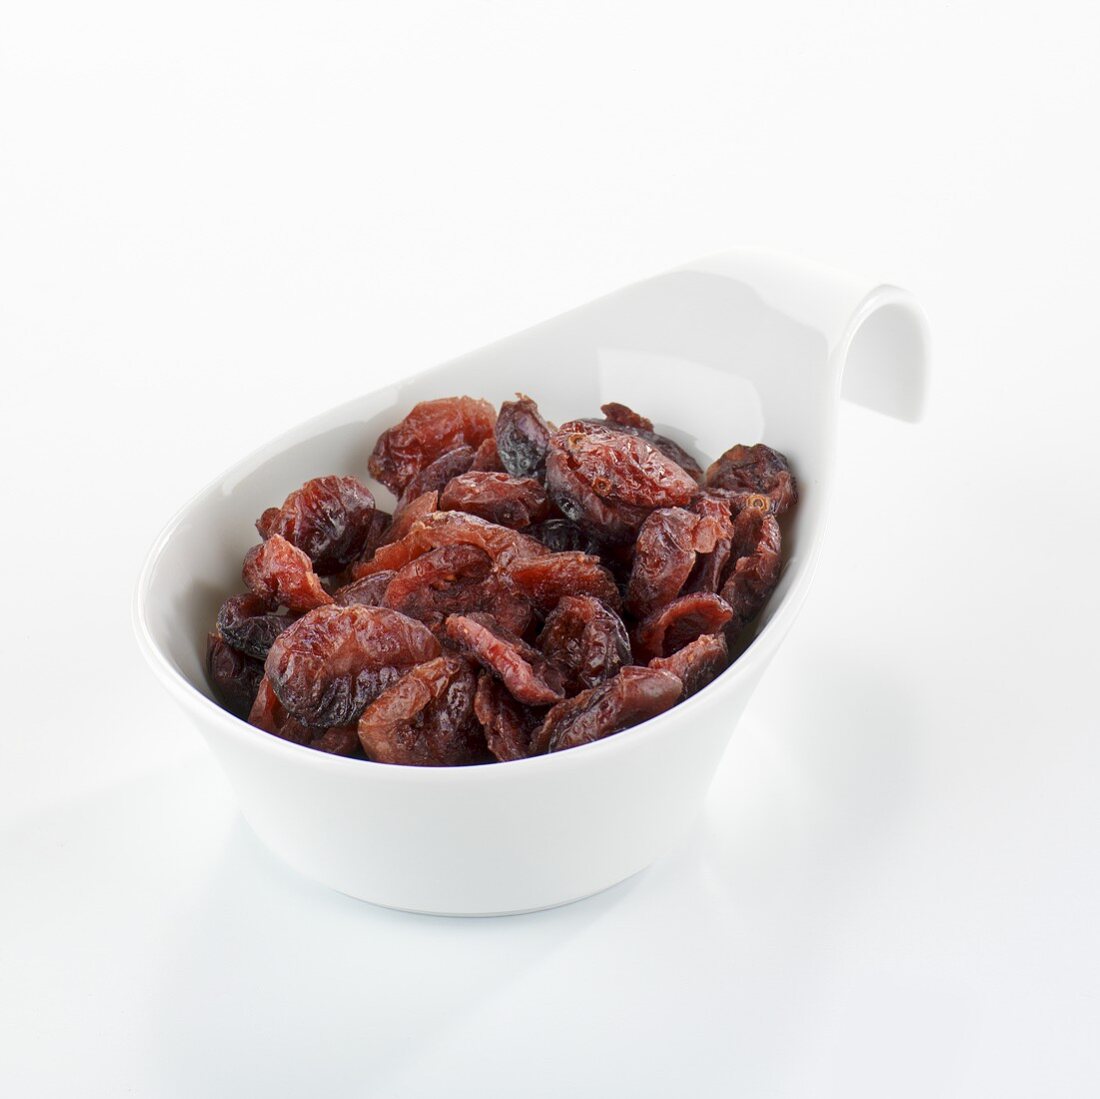 Dried cranberries in a small dish